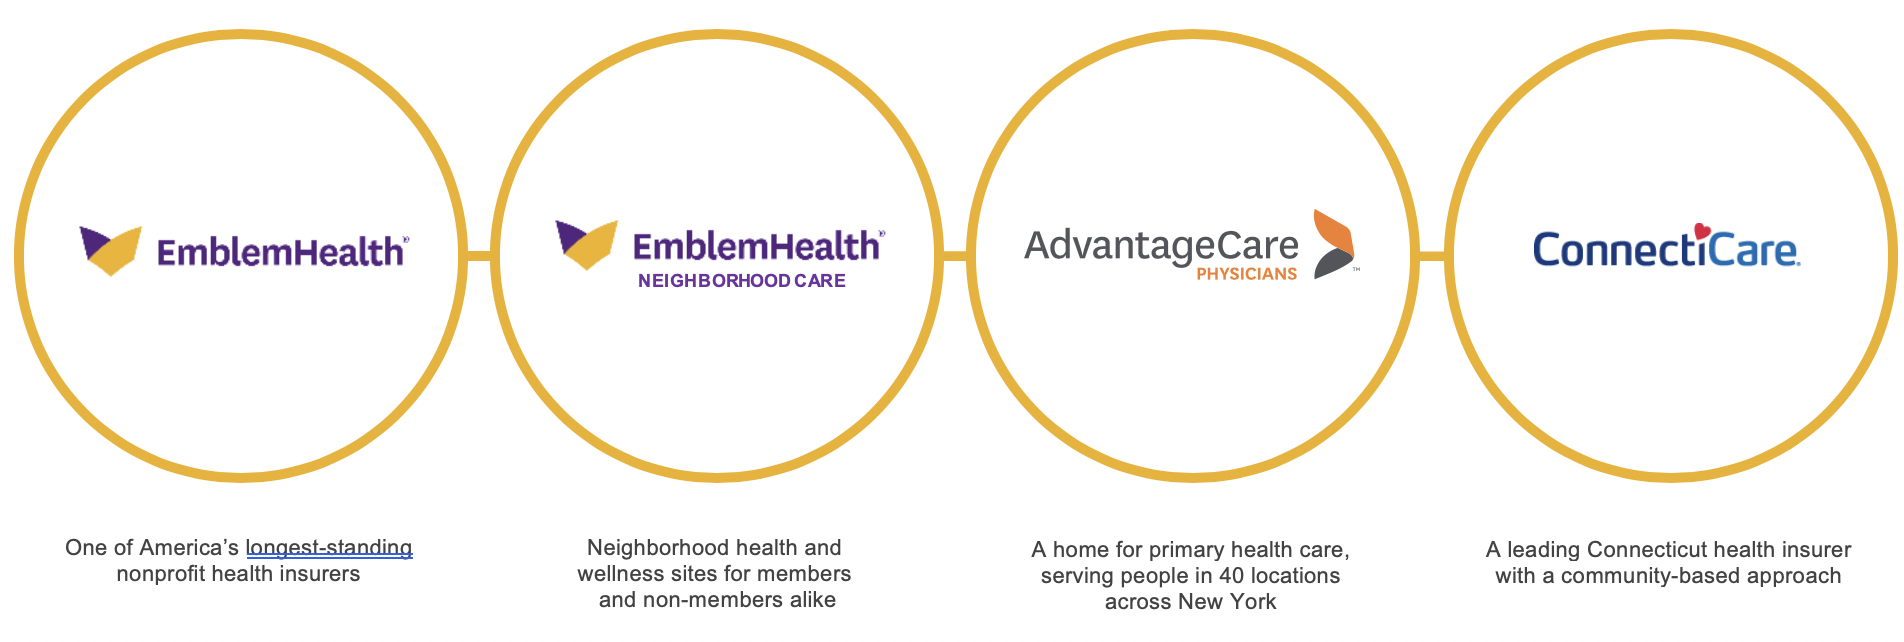 Providers emblemhealth kaiser permanente sf phone number